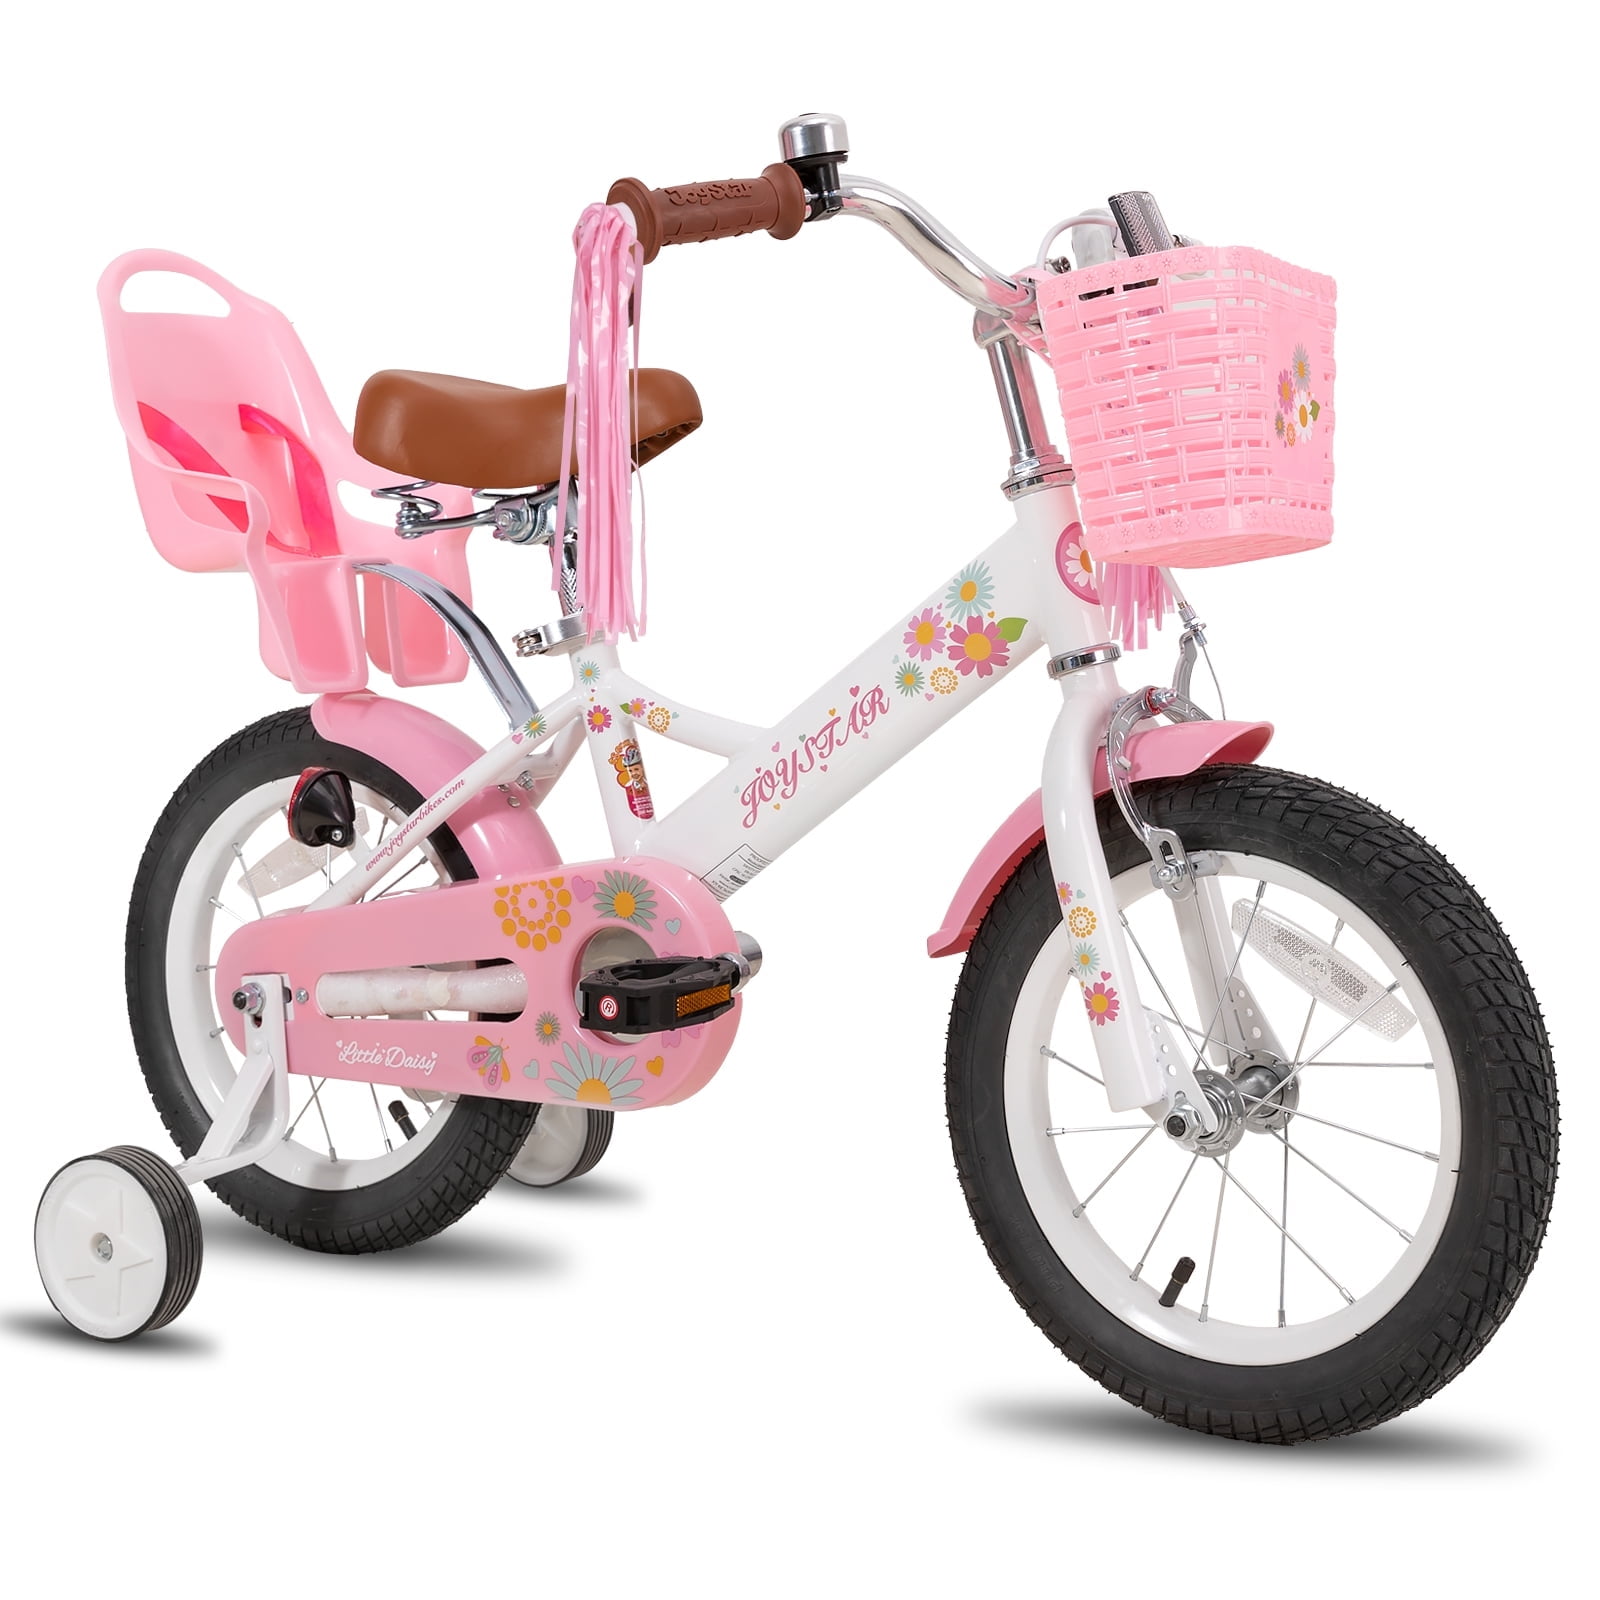 JOYSTAR Little Daisy 12 Inch Kids Bike for 2 3 4 Years Girls with Training Wheels Princess Kids Bicycle with Basket Bike Streamers Toddler Cycle Bikes White - image 1 of 11